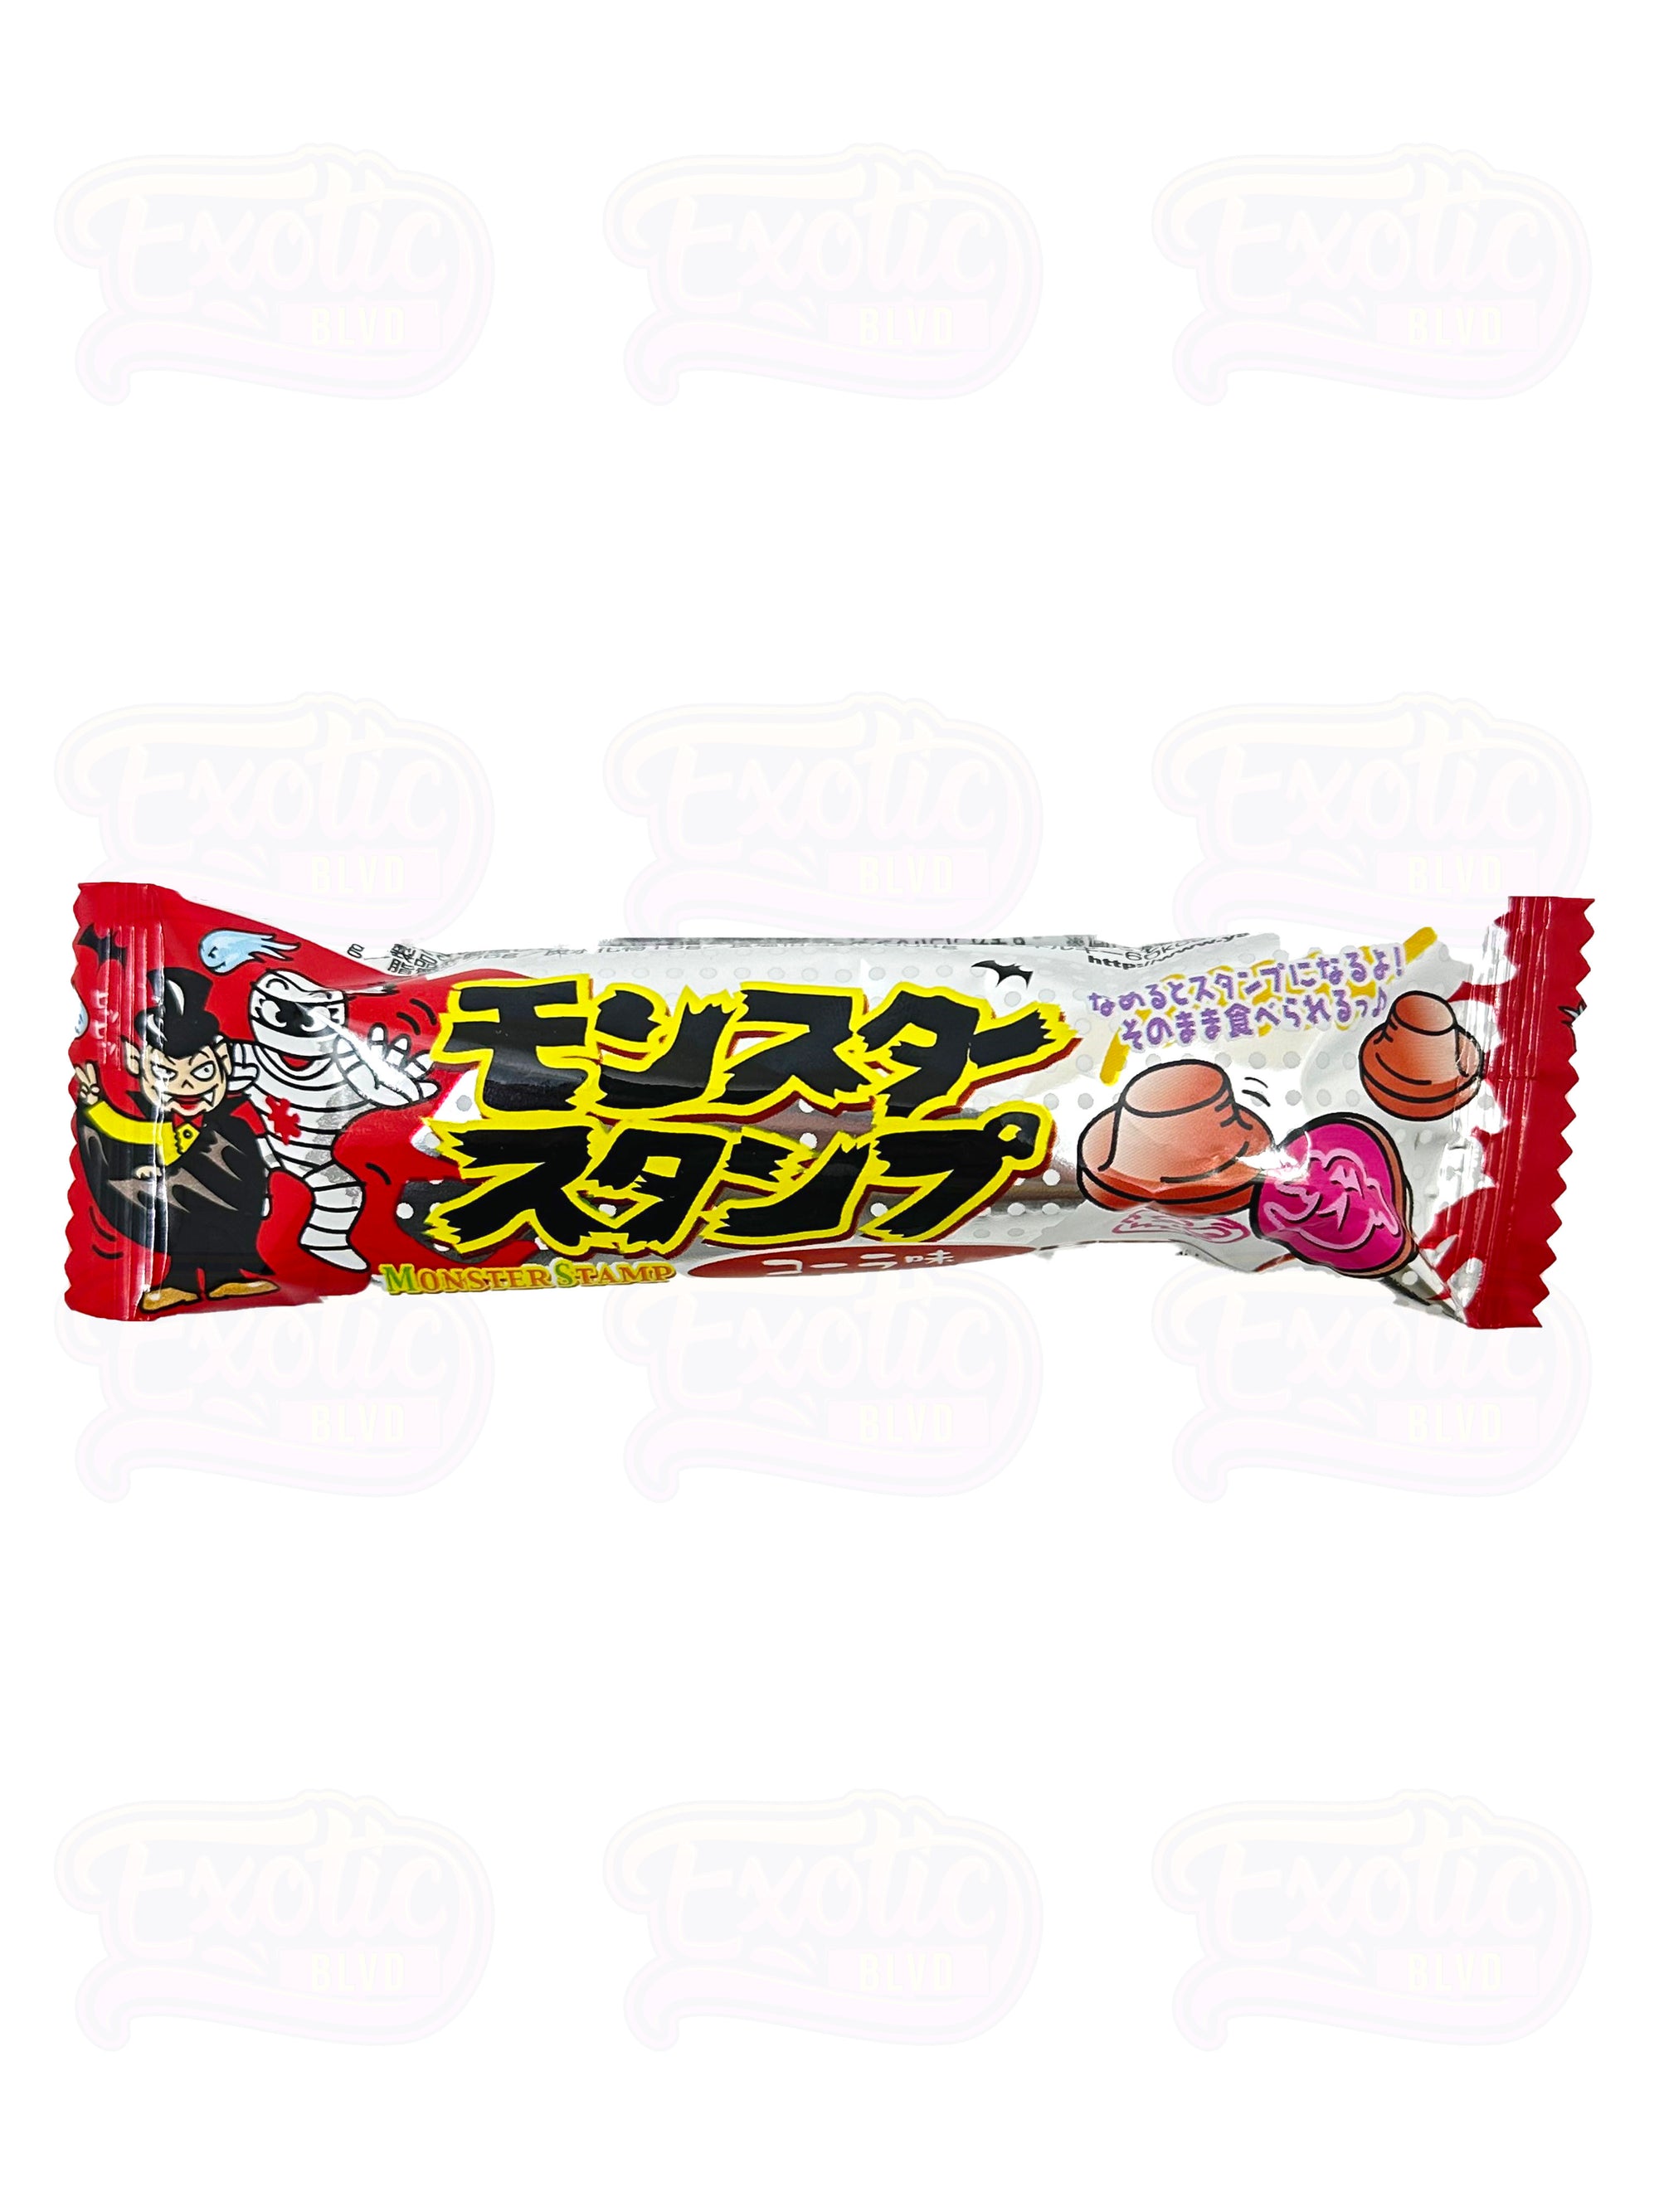 Yaokin Monster Stamp Candy Cola